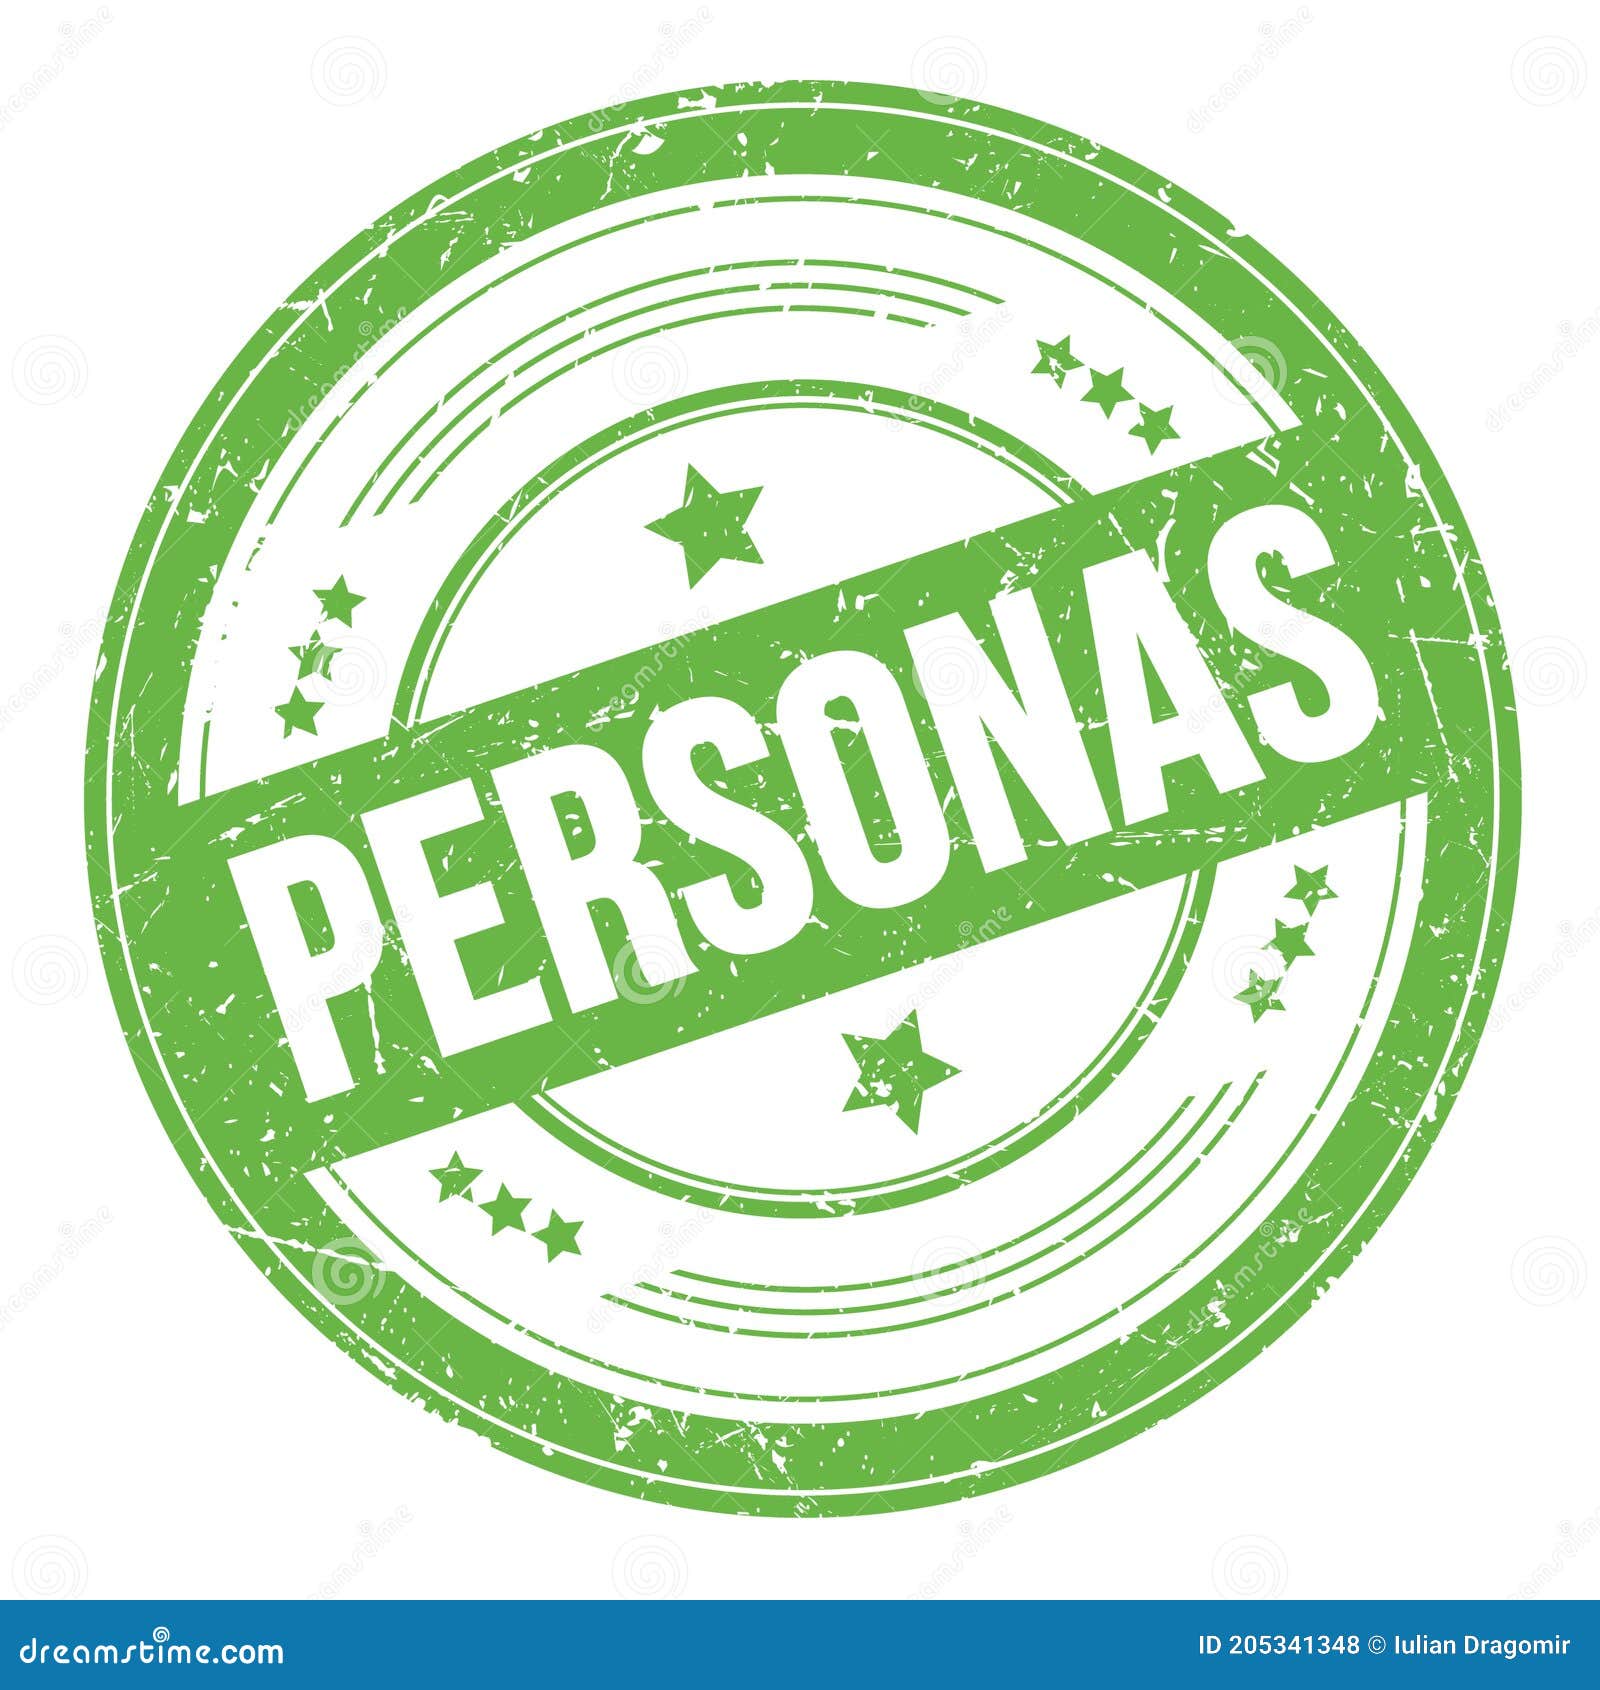 personas text on green round grungy stamp